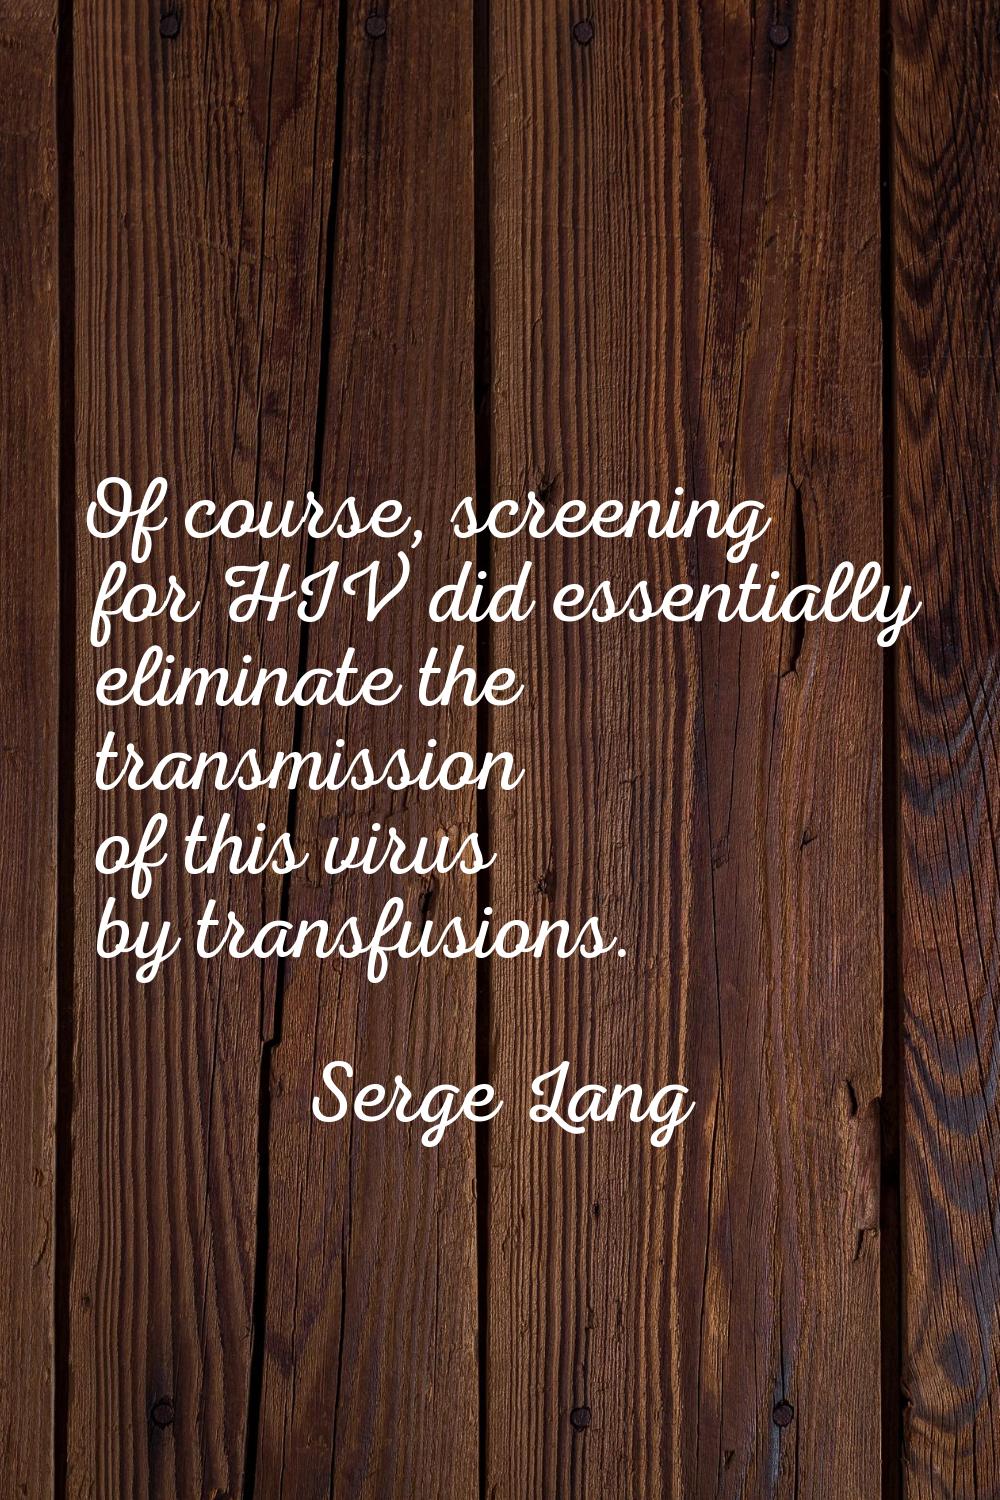 Of course, screening for HIV did essentially eliminate the transmission of this virus by transfusio